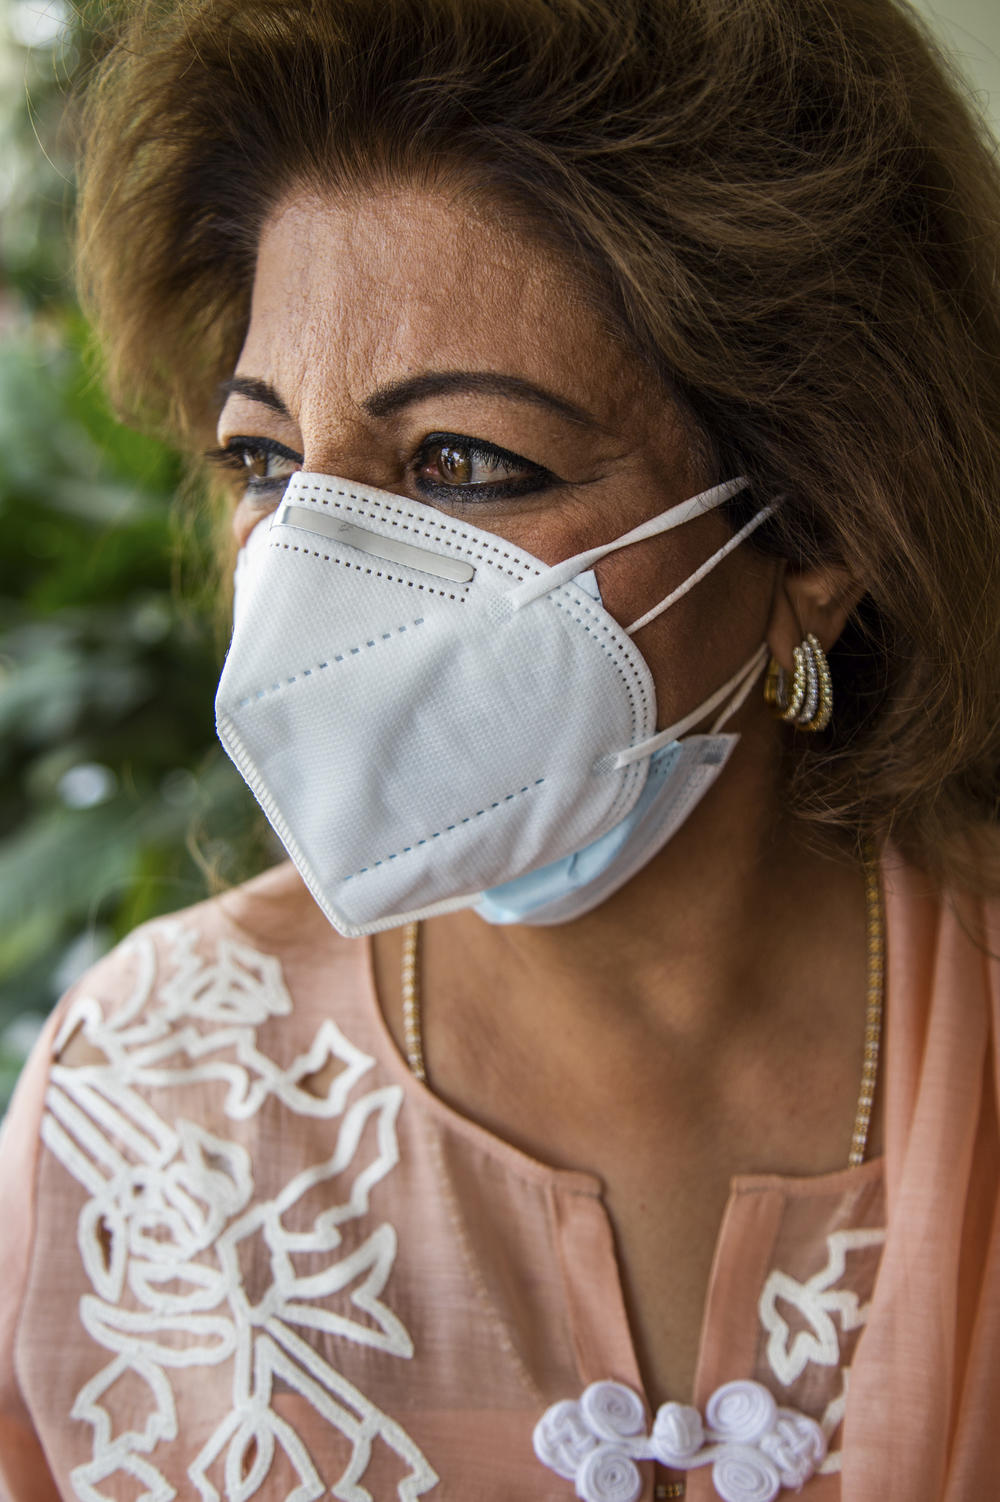 Dr. Seemin Jamali says that attacks on doctors and nurses occur regularly — usually instigated by family members or acquaintances frustrated by a patient's diagnosis or death. It happened before the pandemic, and now it's happening as a result of the pandemic.